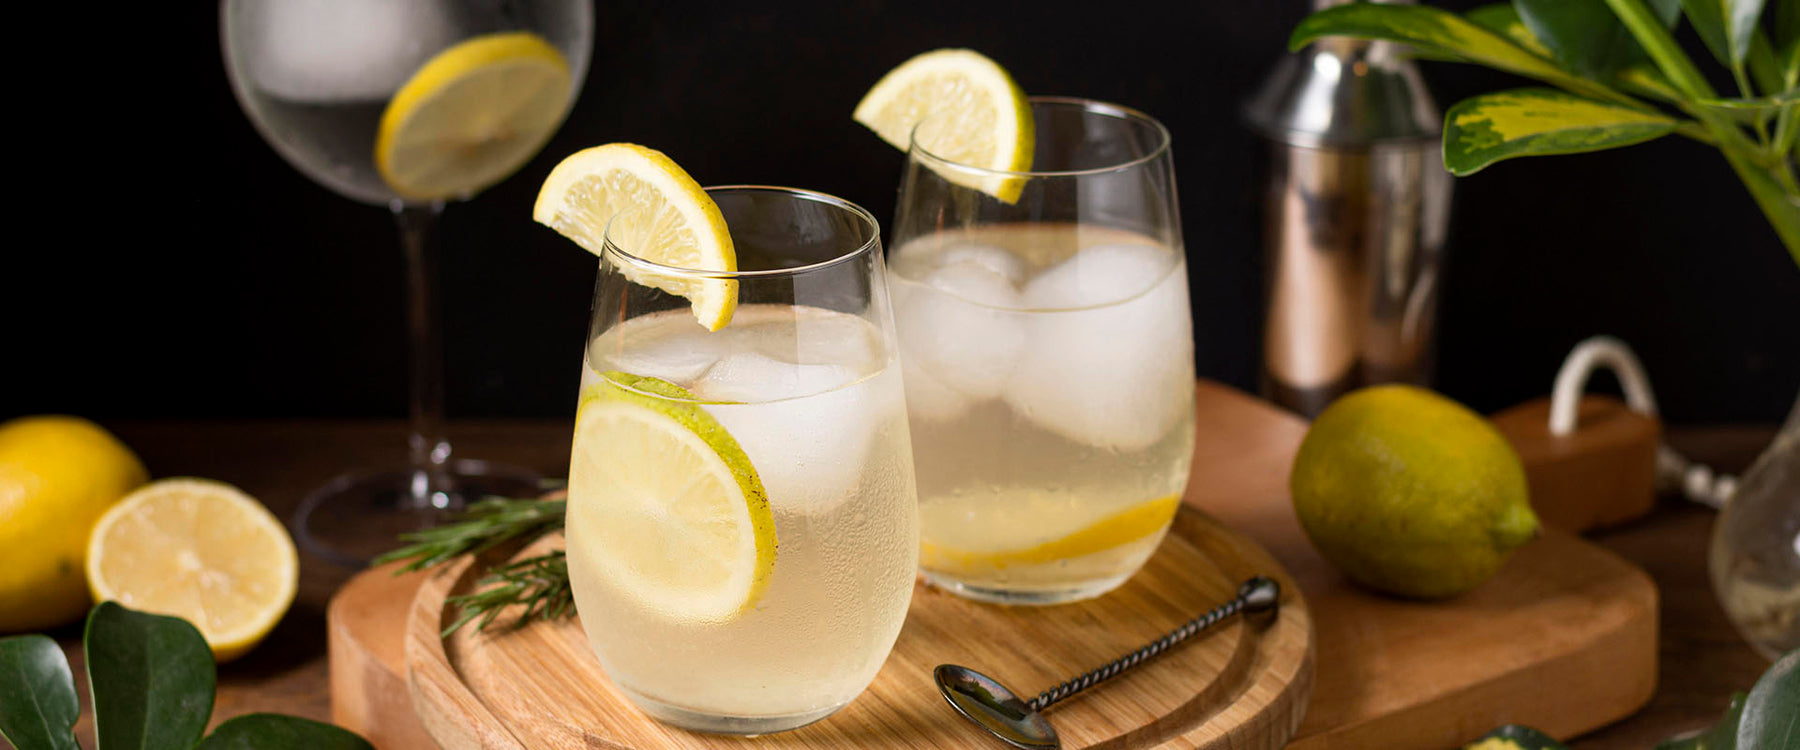 Recipe: How to Make the Perfect Gin and Tonic (With Origin Story)